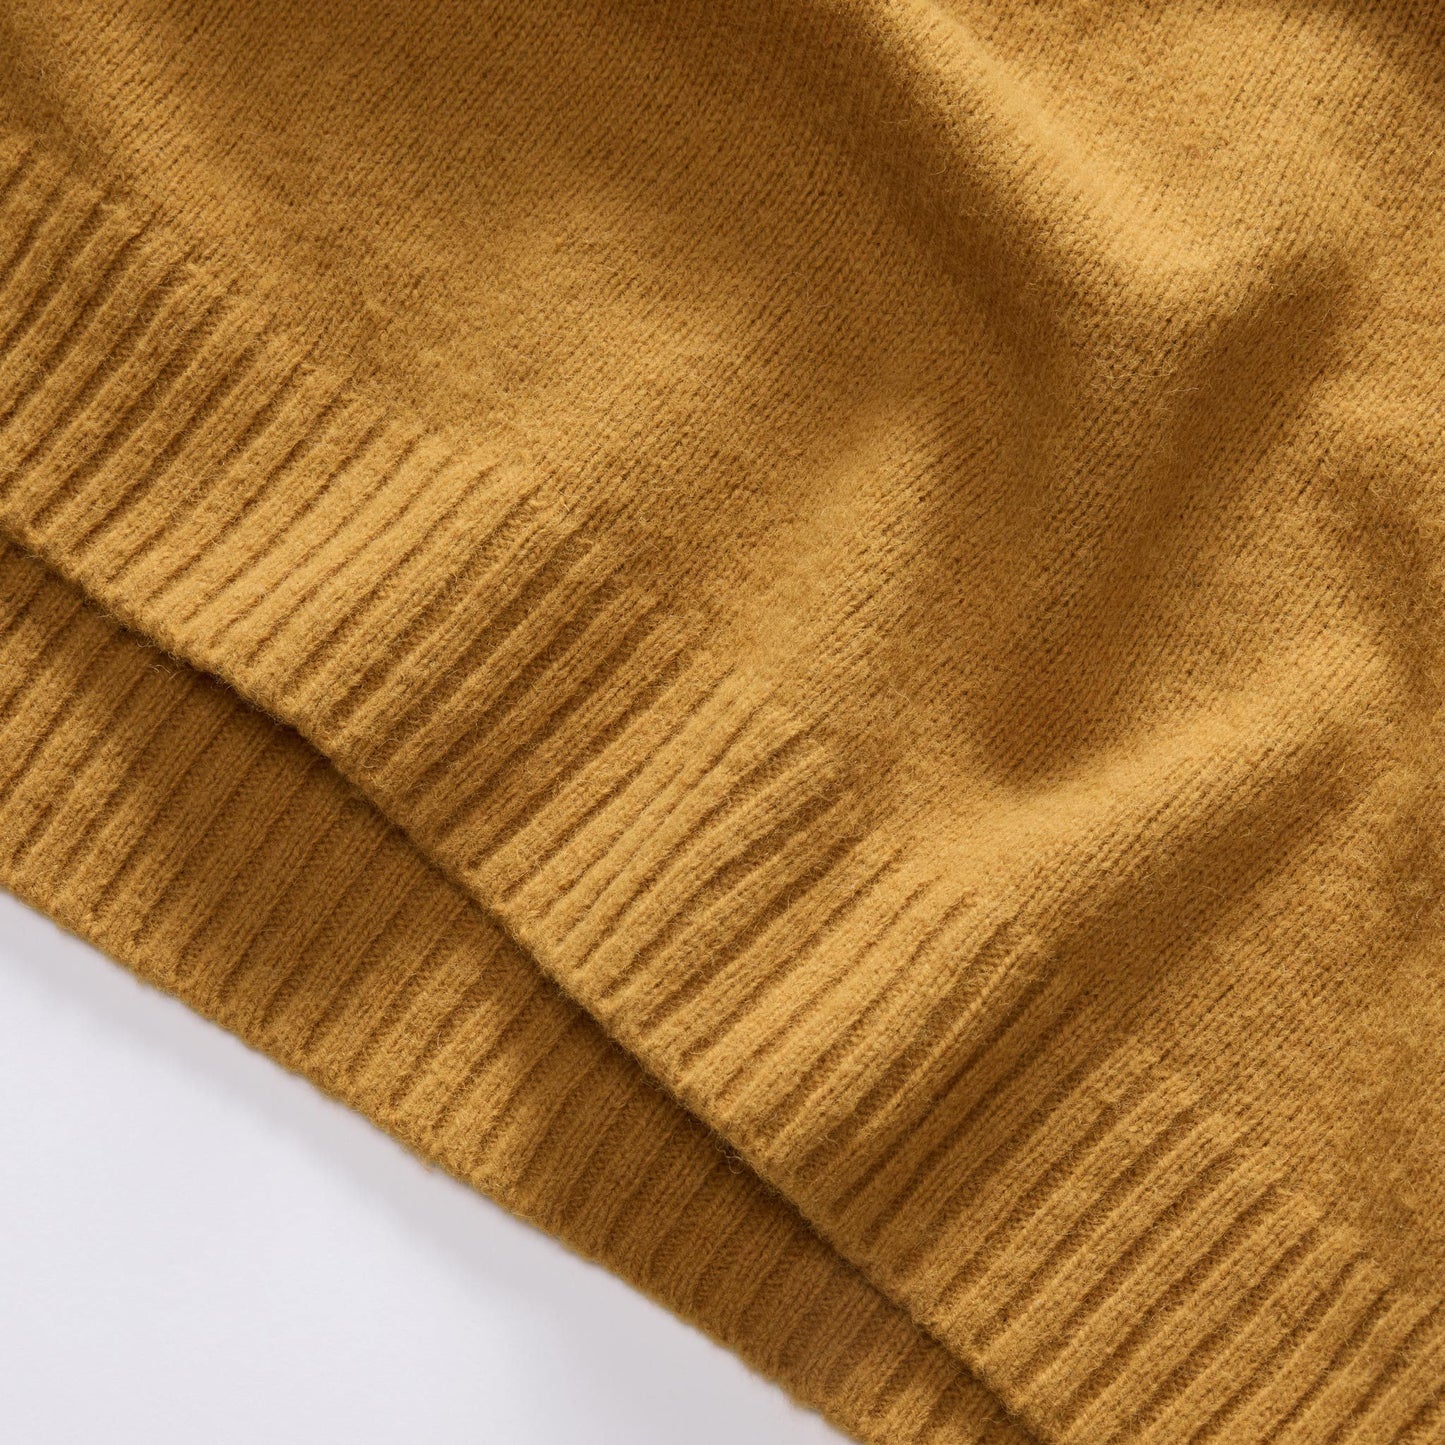 The Lodge Sweater in Gold